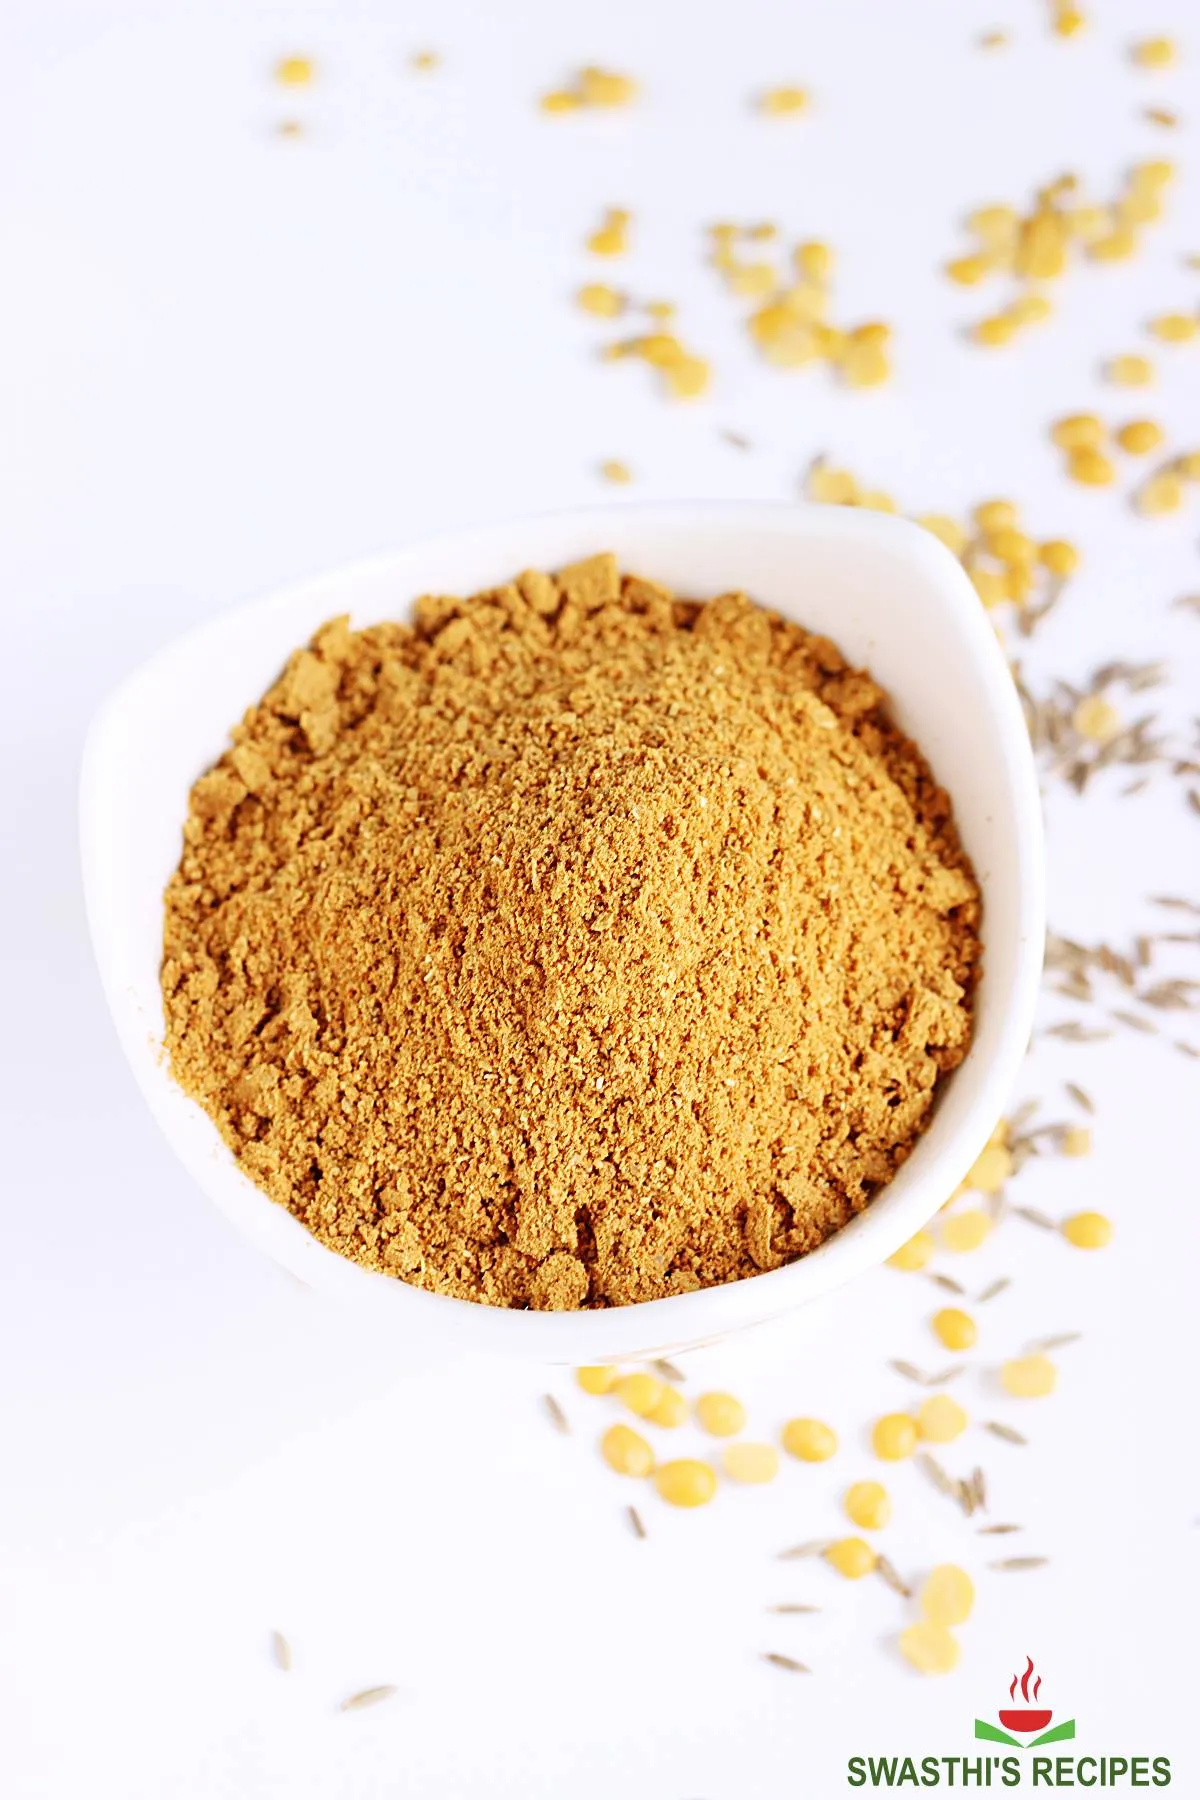 rasam powder made with lentils and spices